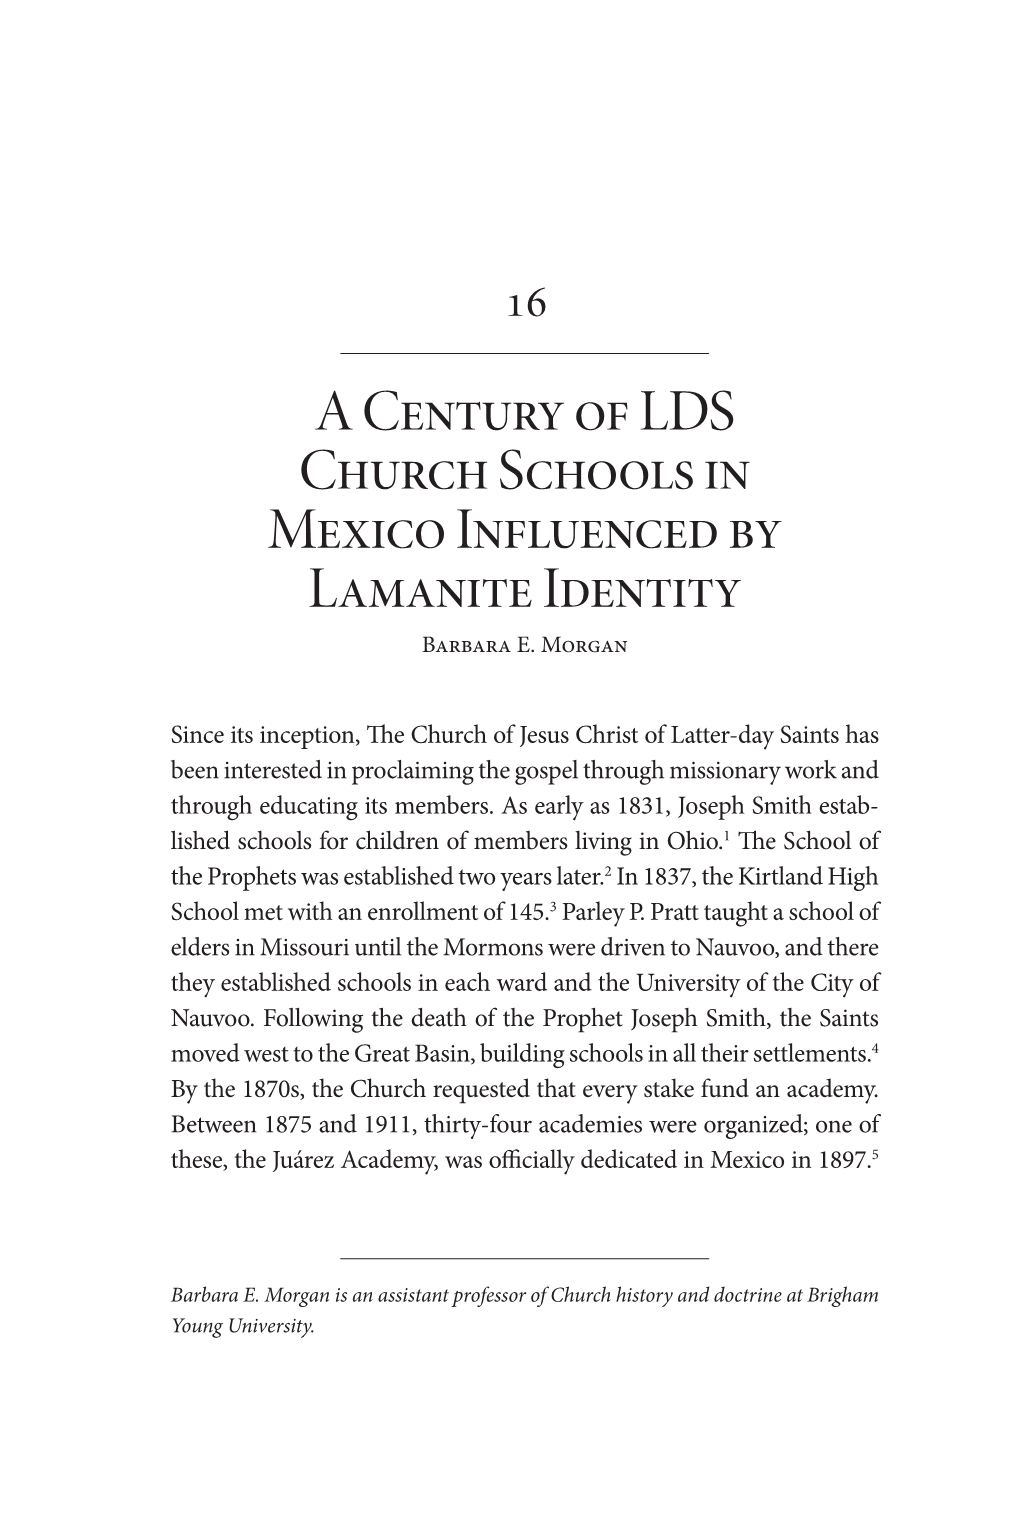 A Century of LDS Church Schools in Mexico Influenced by Lamanite Identity Barbara E